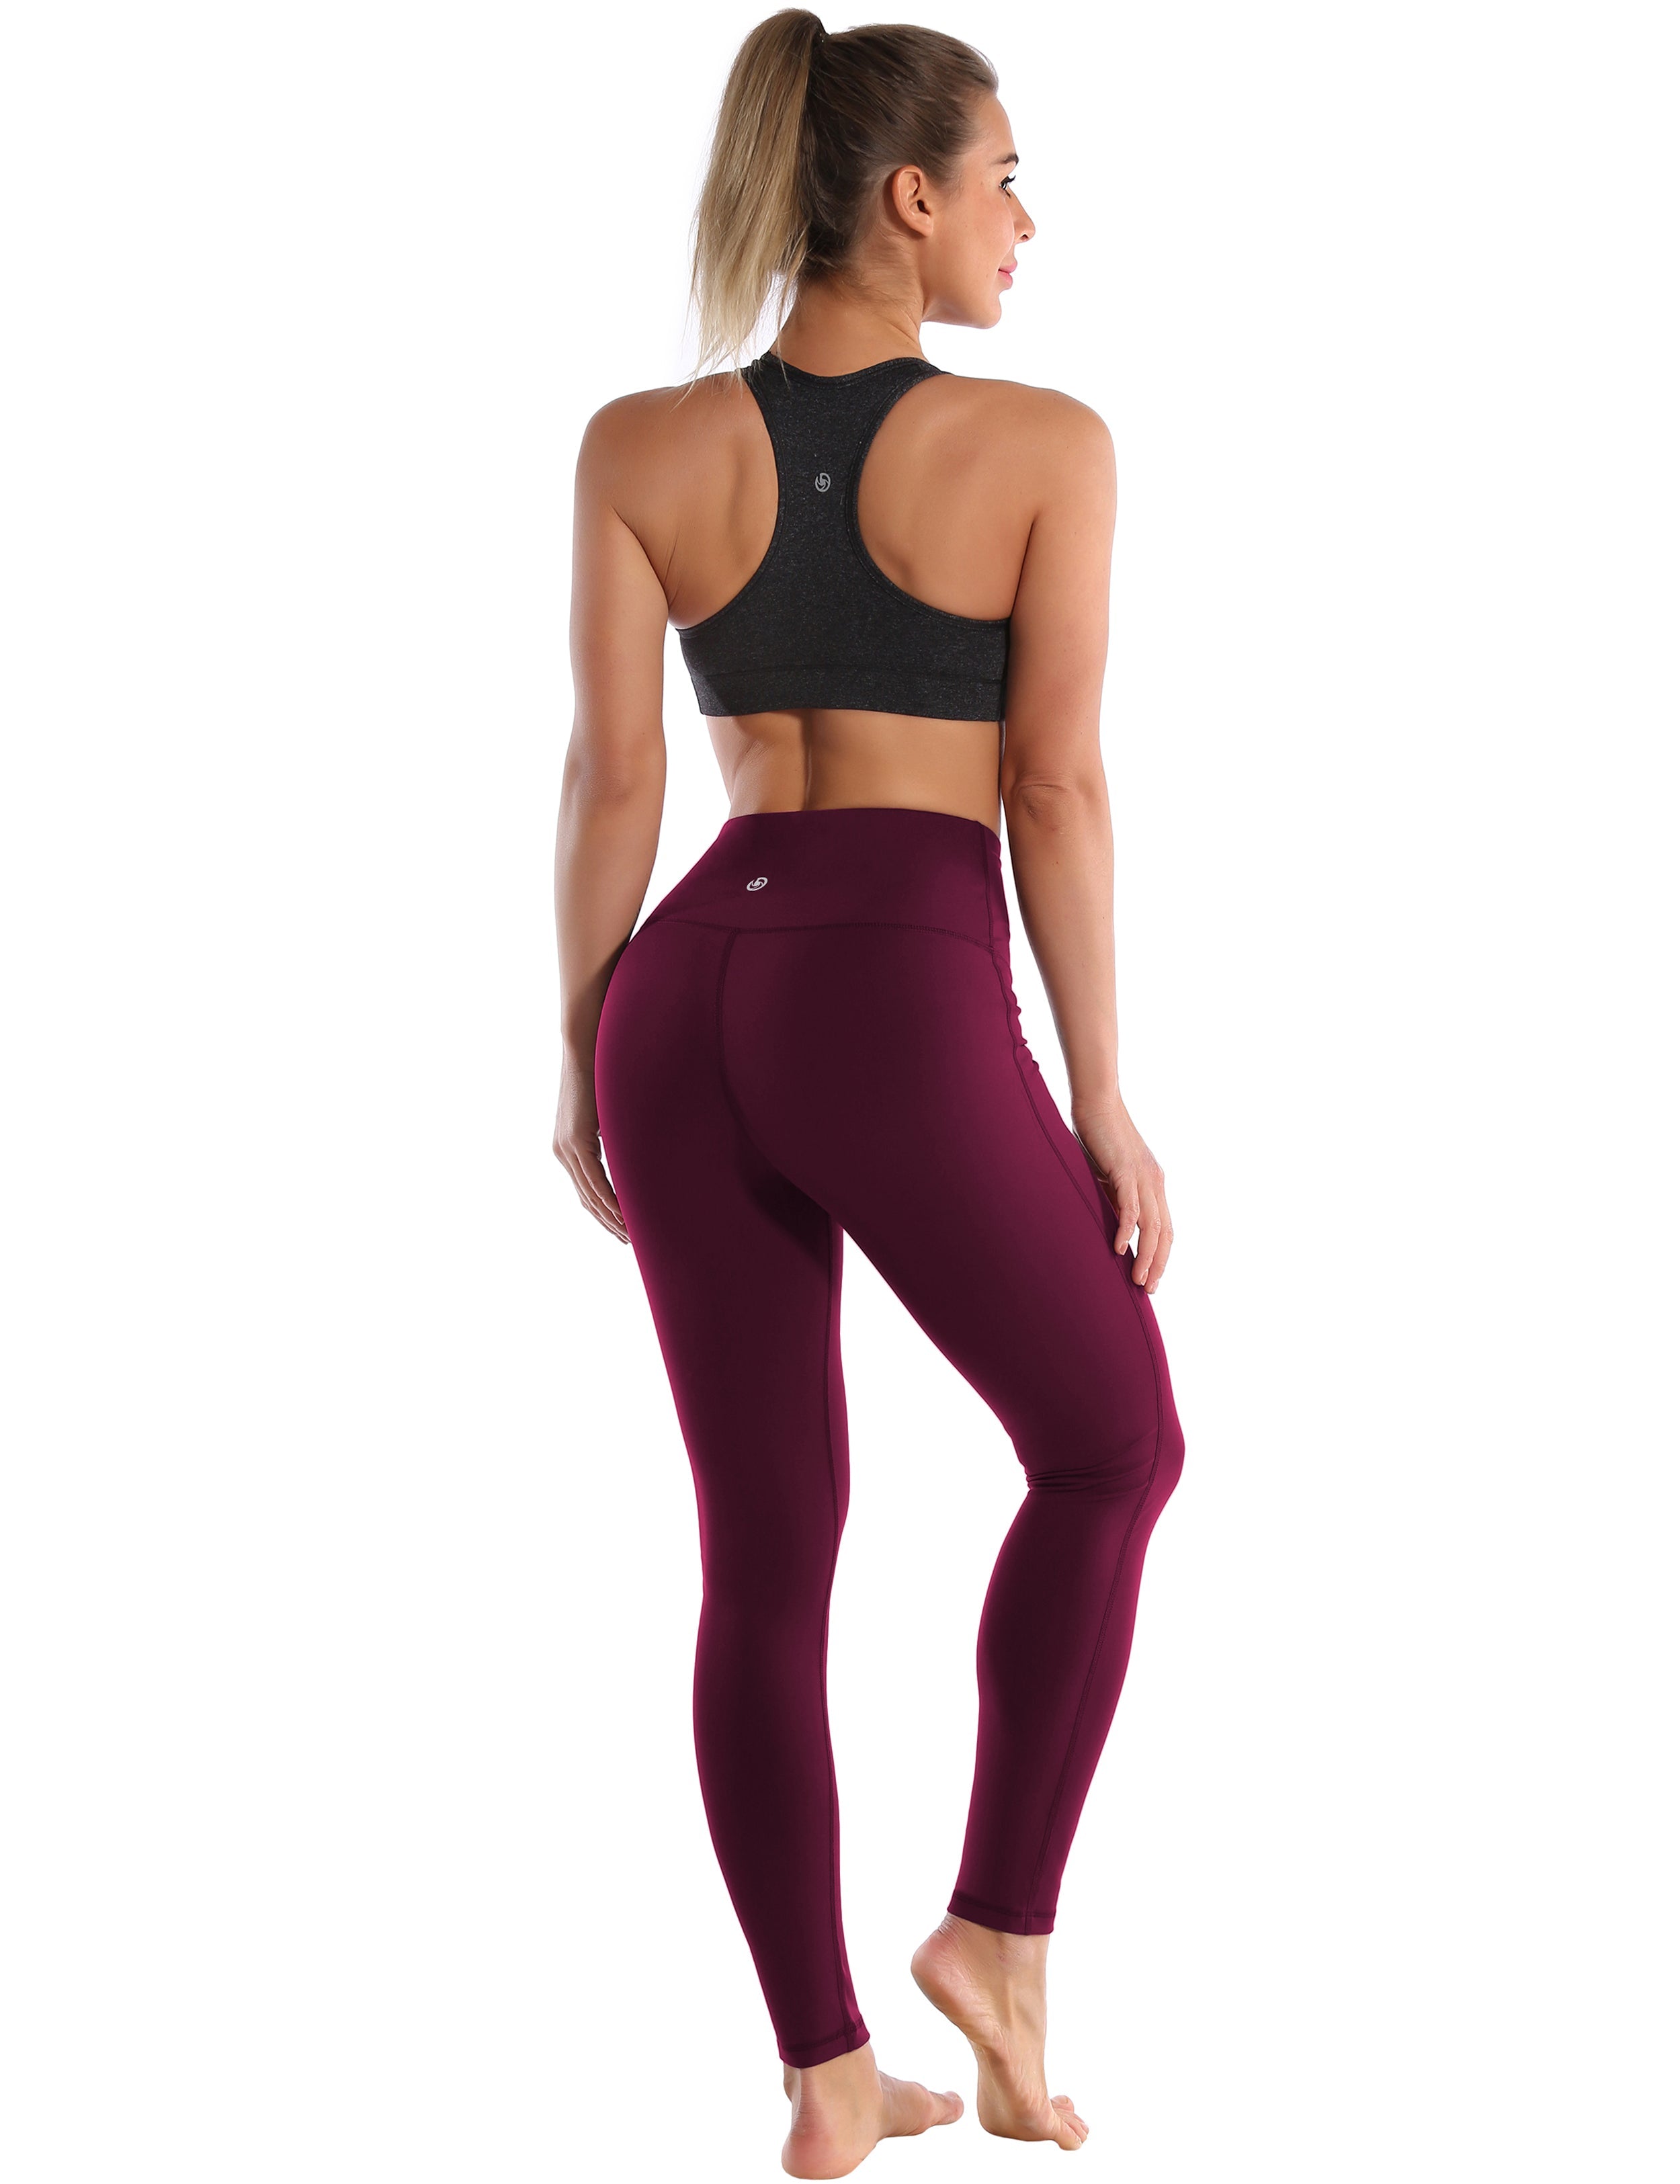 High Waist Side Line Pilates Pants grapevine Side Line is Make Your Legs Look Longer and Thinner 75%Nylon/25%Spandex Fabric doesn't attract lint easily 4-way stretch No see-through Moisture-wicking Tummy control Inner pocket Two lengths